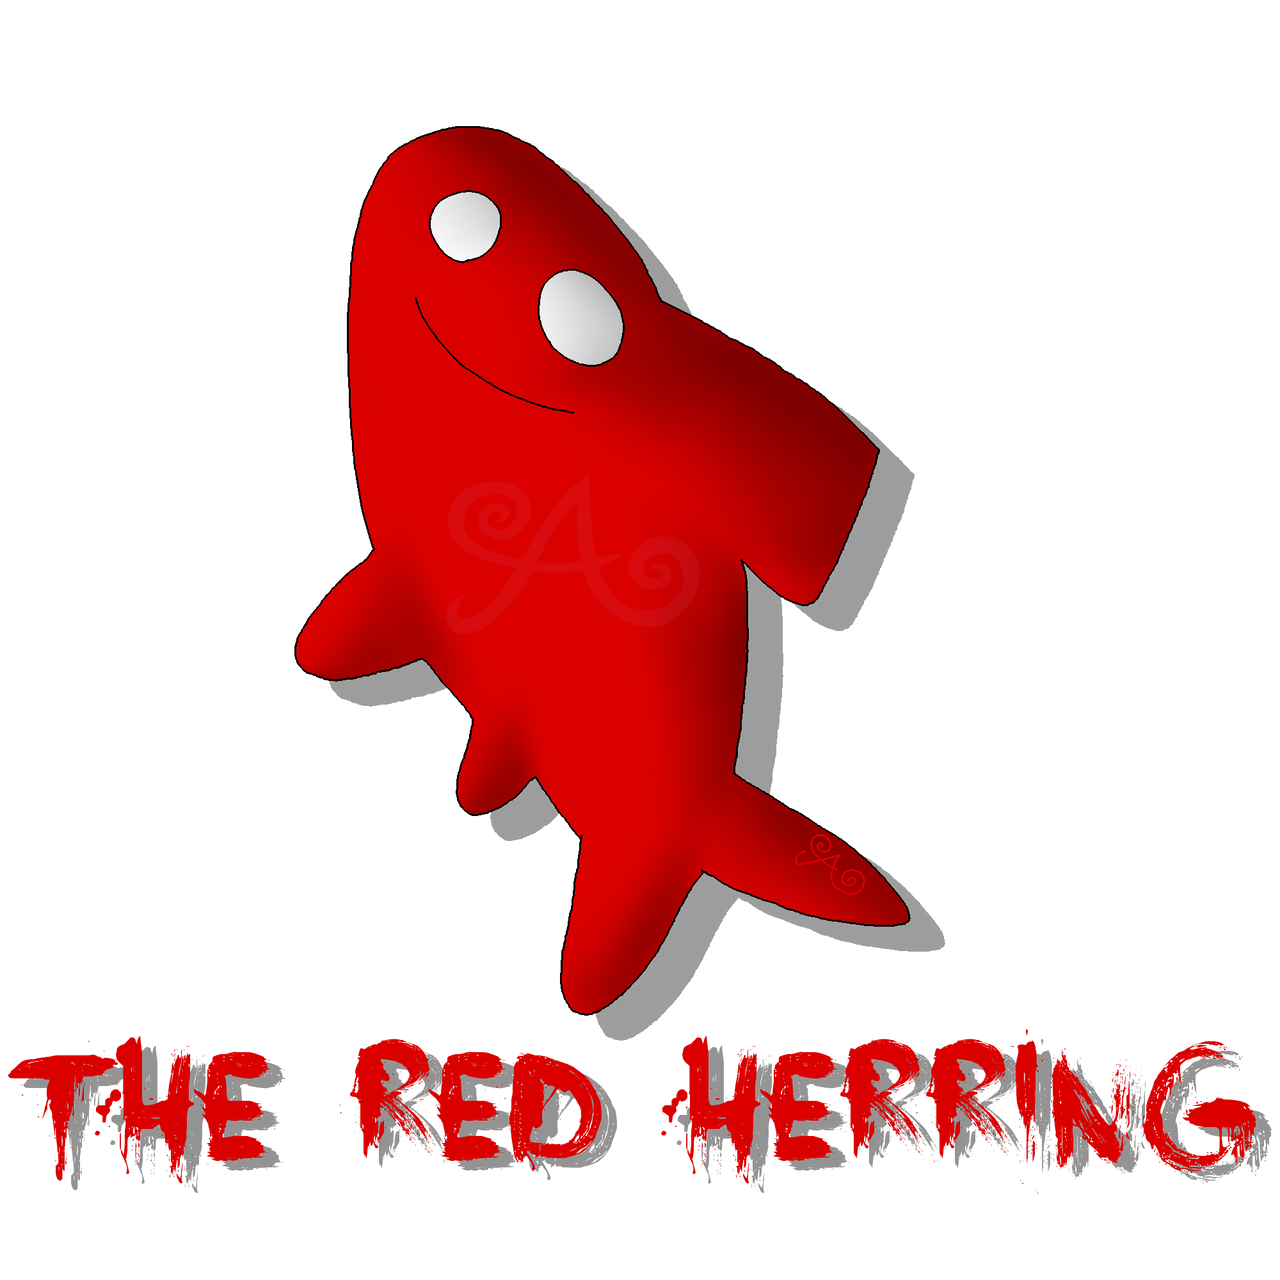 Red herring. Red Herring tmp2. Red Herring идиома. Throw a Red Herring.